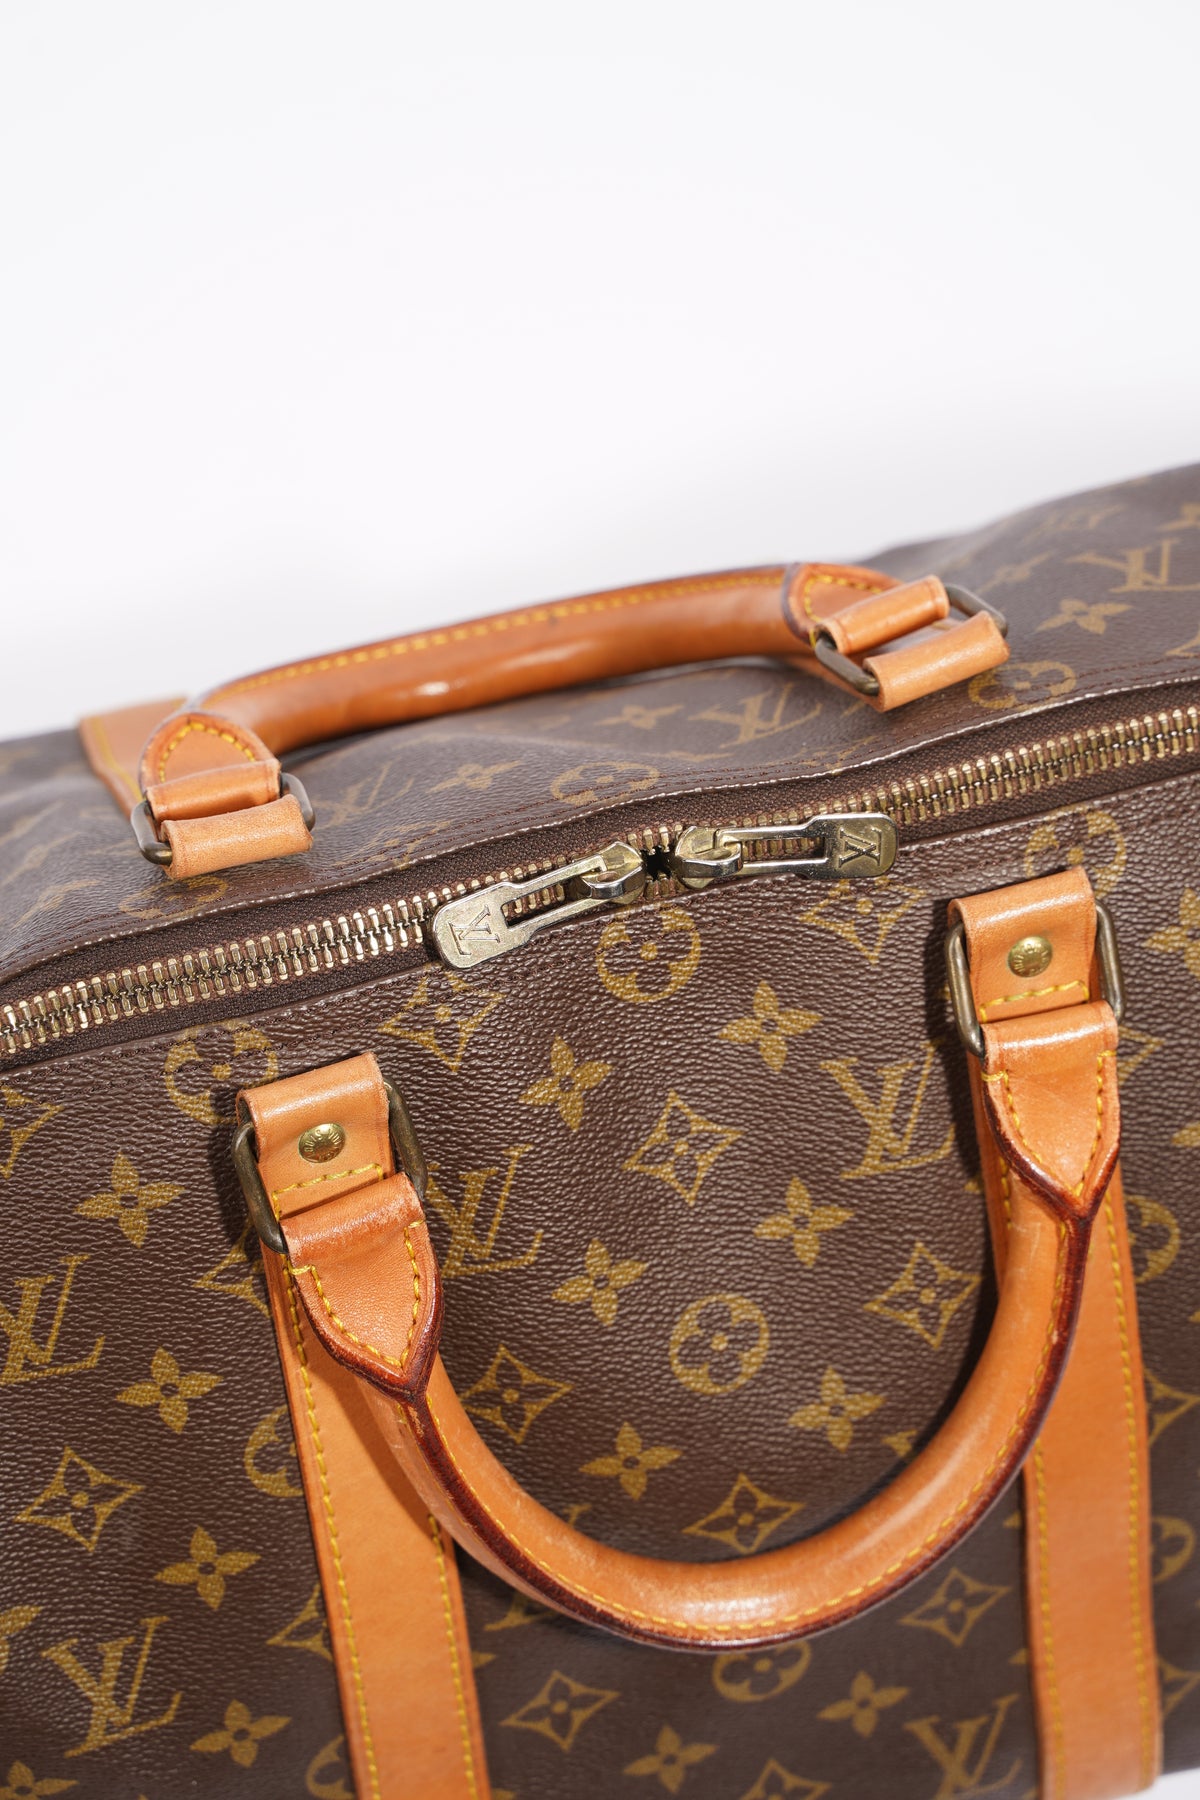 Louis Vuitton Nomade Keepall 50. On website search for AO27187